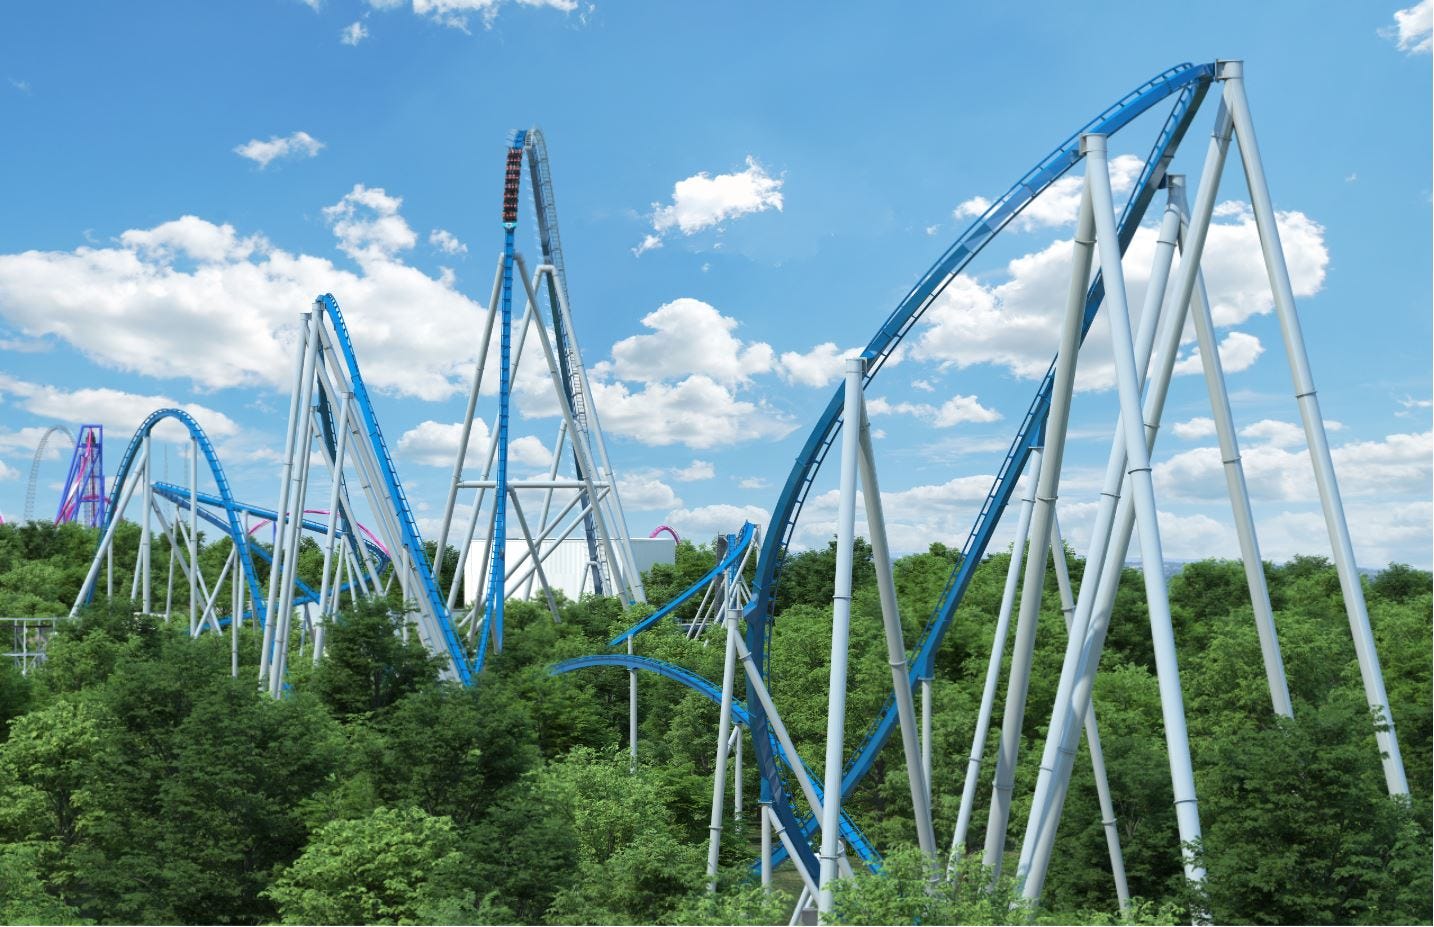 Kings Island's new giga coaster Orion completes first test run